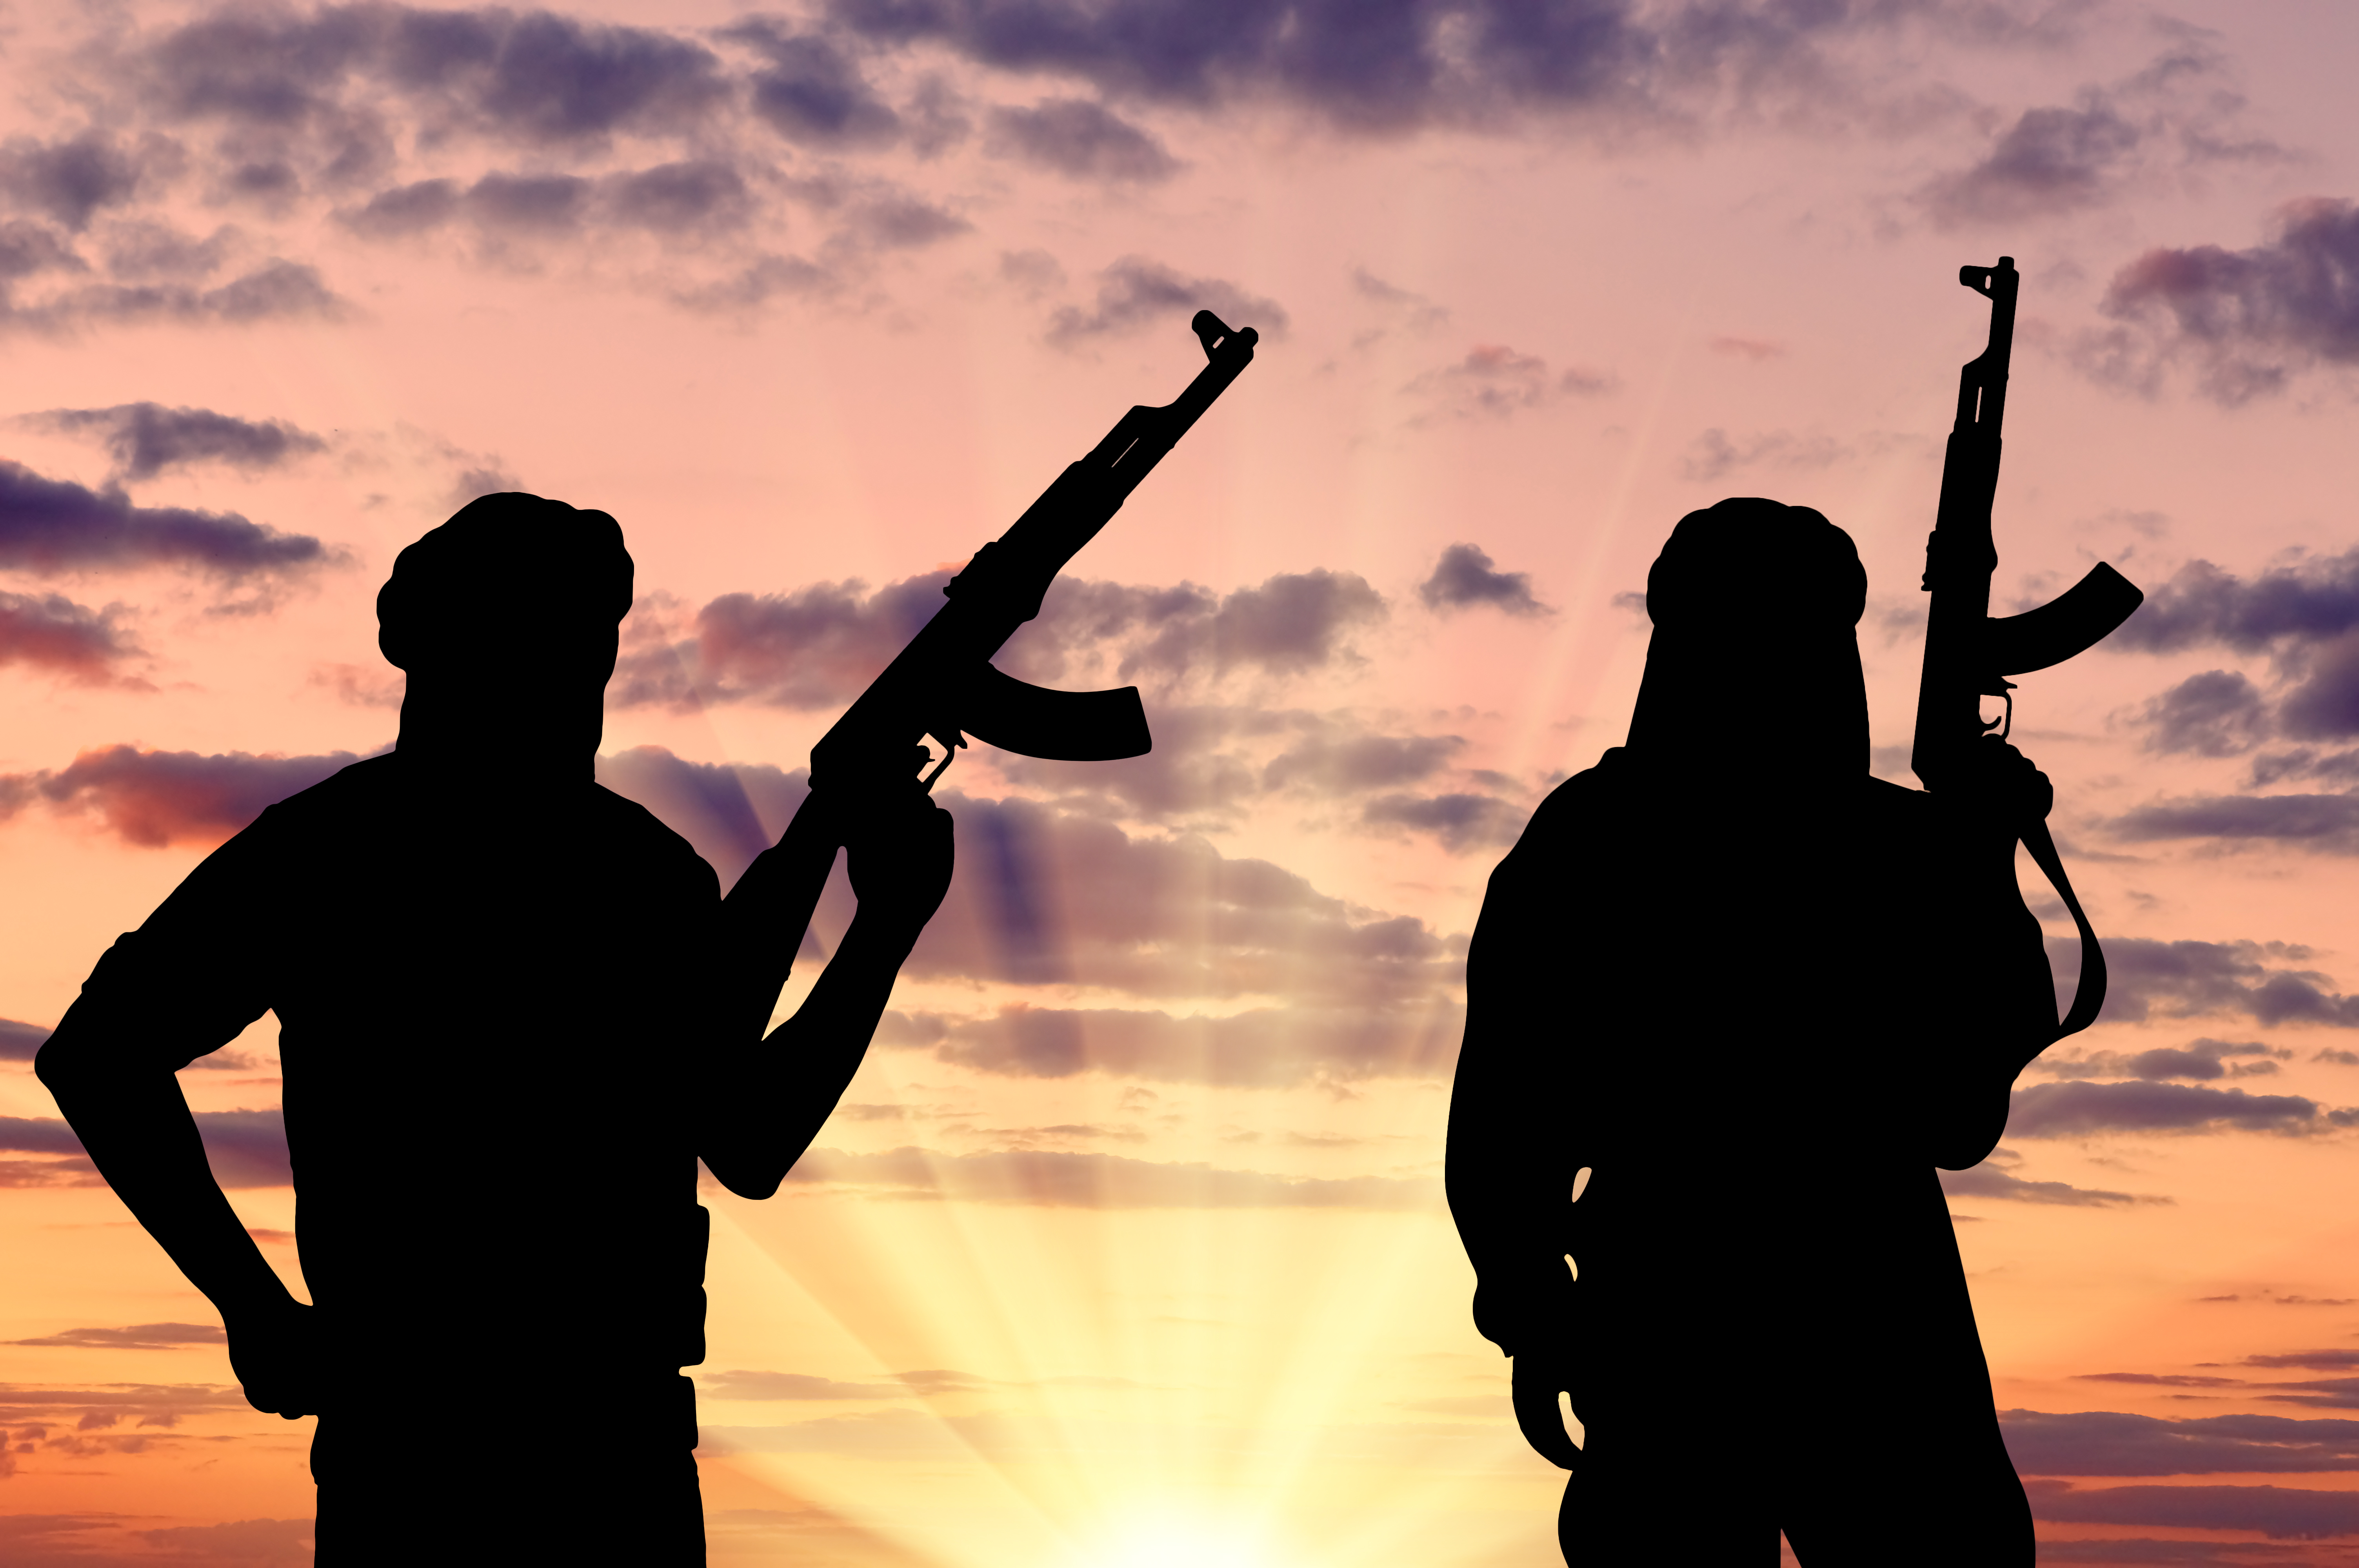 Silhouette of two terrorists